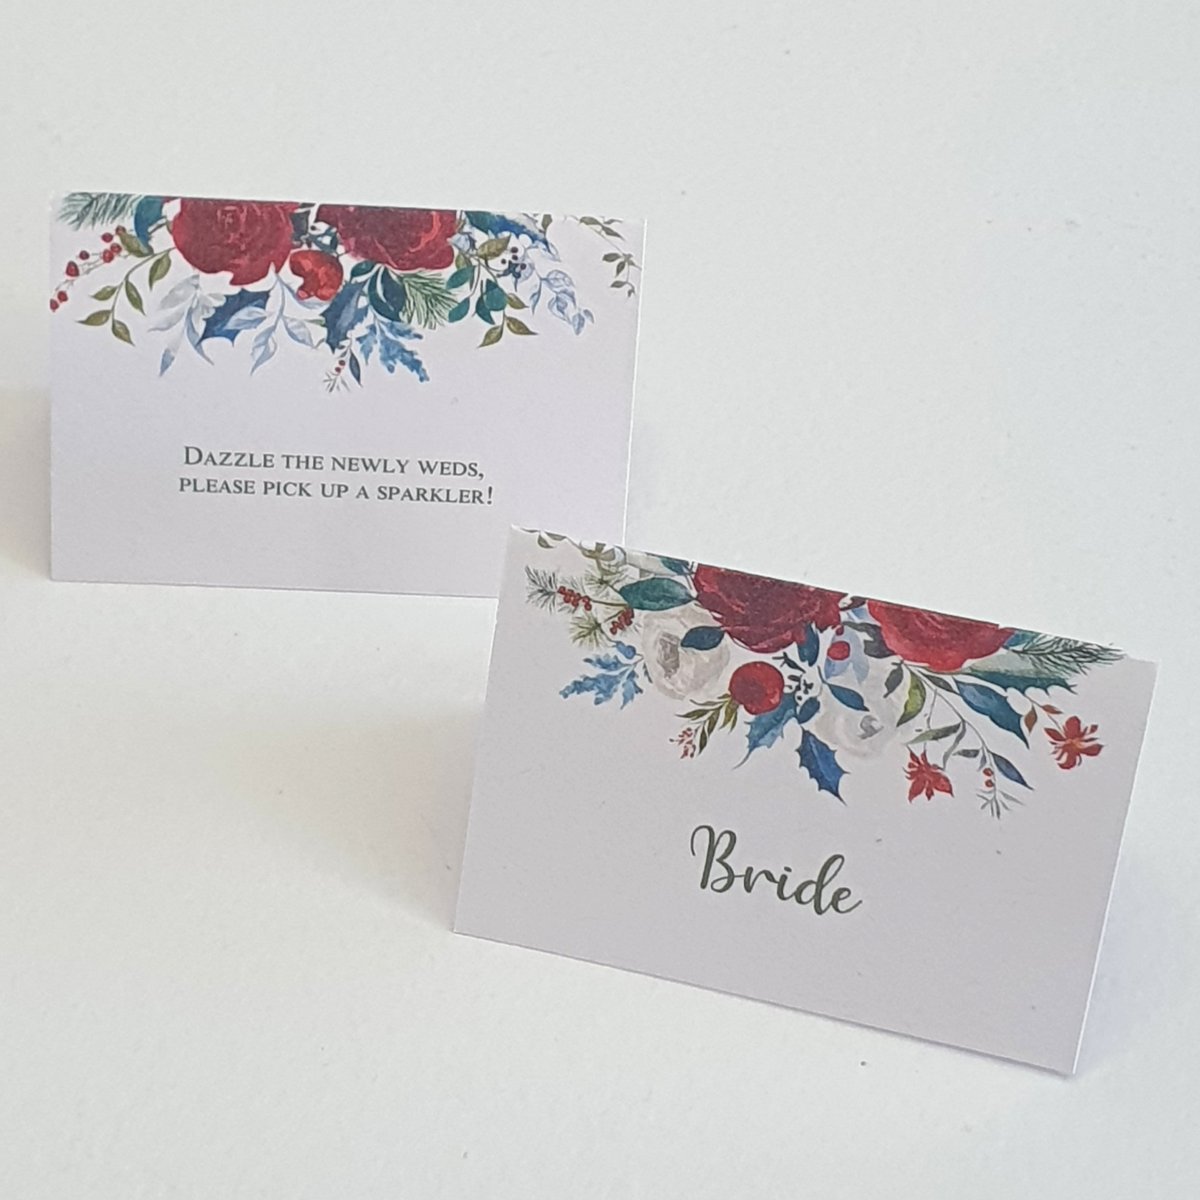 wedding place cards with a festive read and green floral design